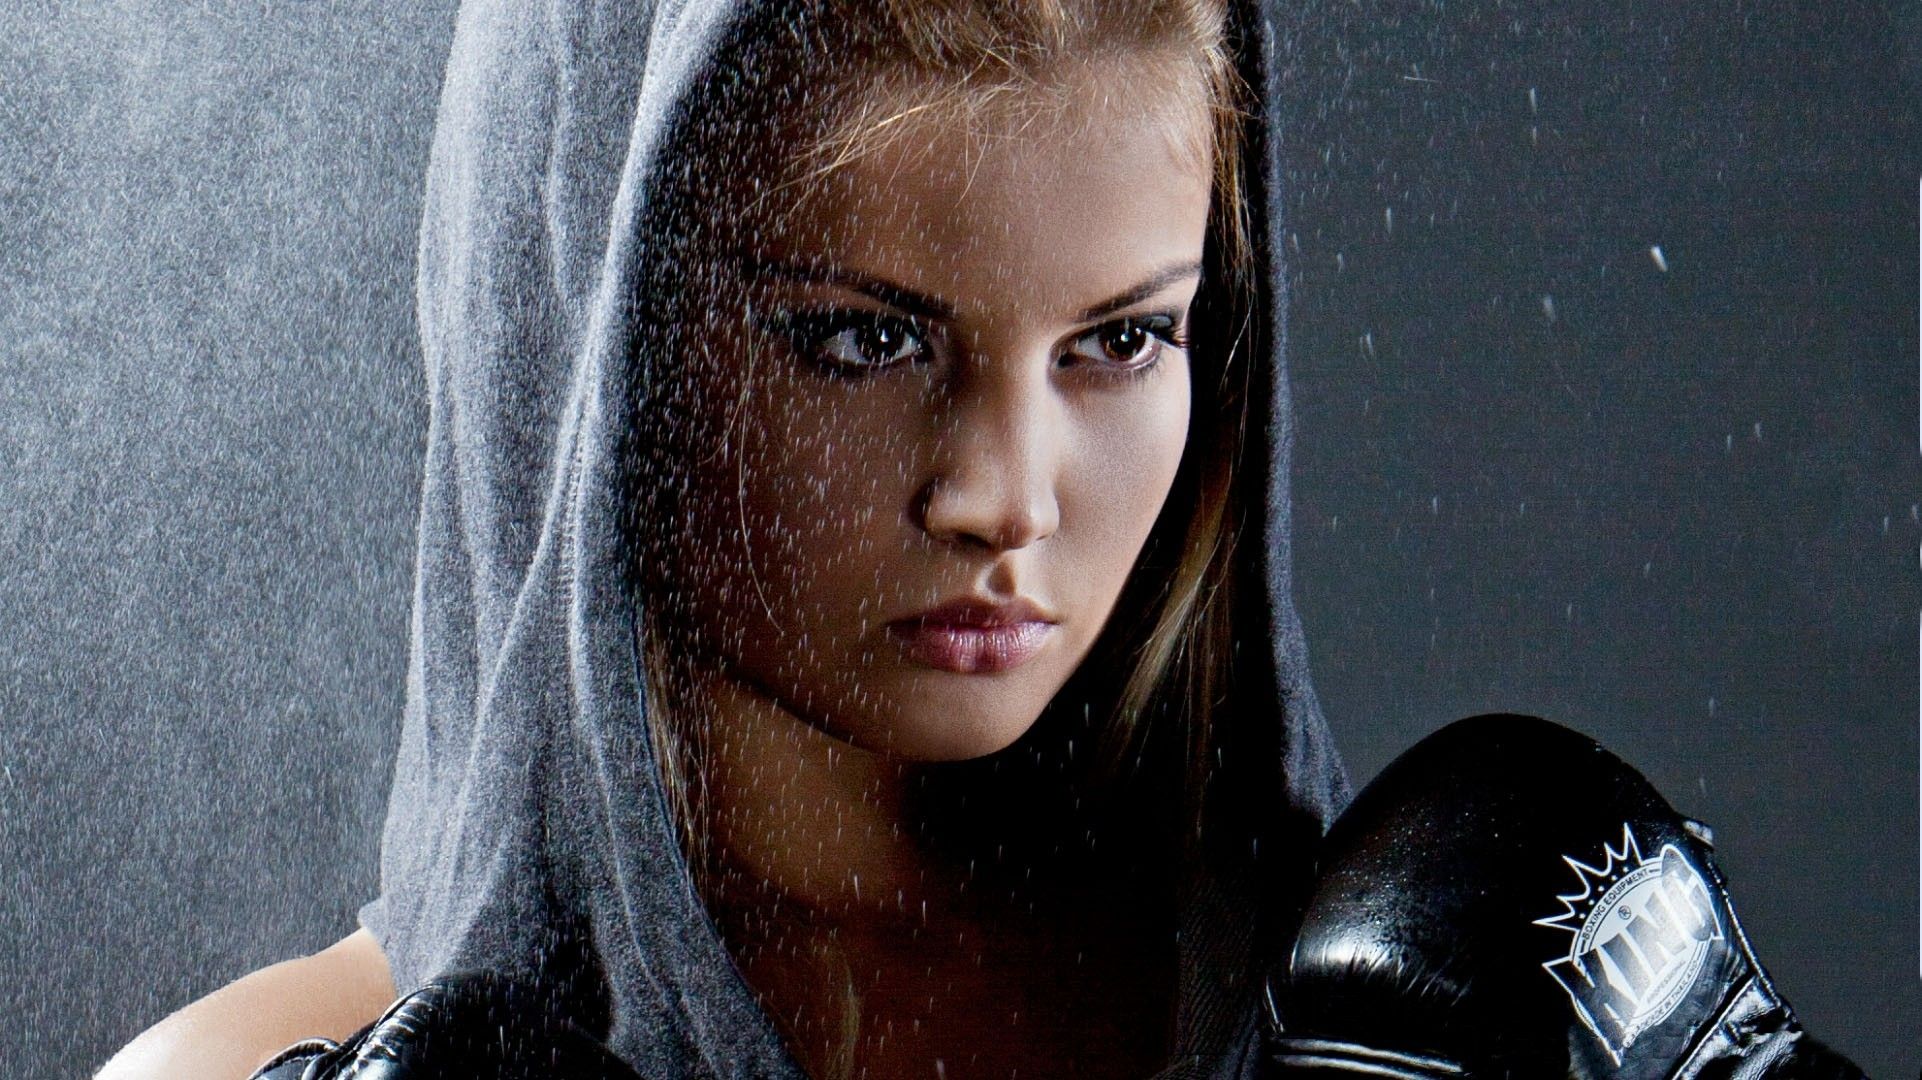 women hoodie female warriors boxers faces hooded 1922x1080 wallpaper High Quality Wallpaper, High Definition Wallpaper